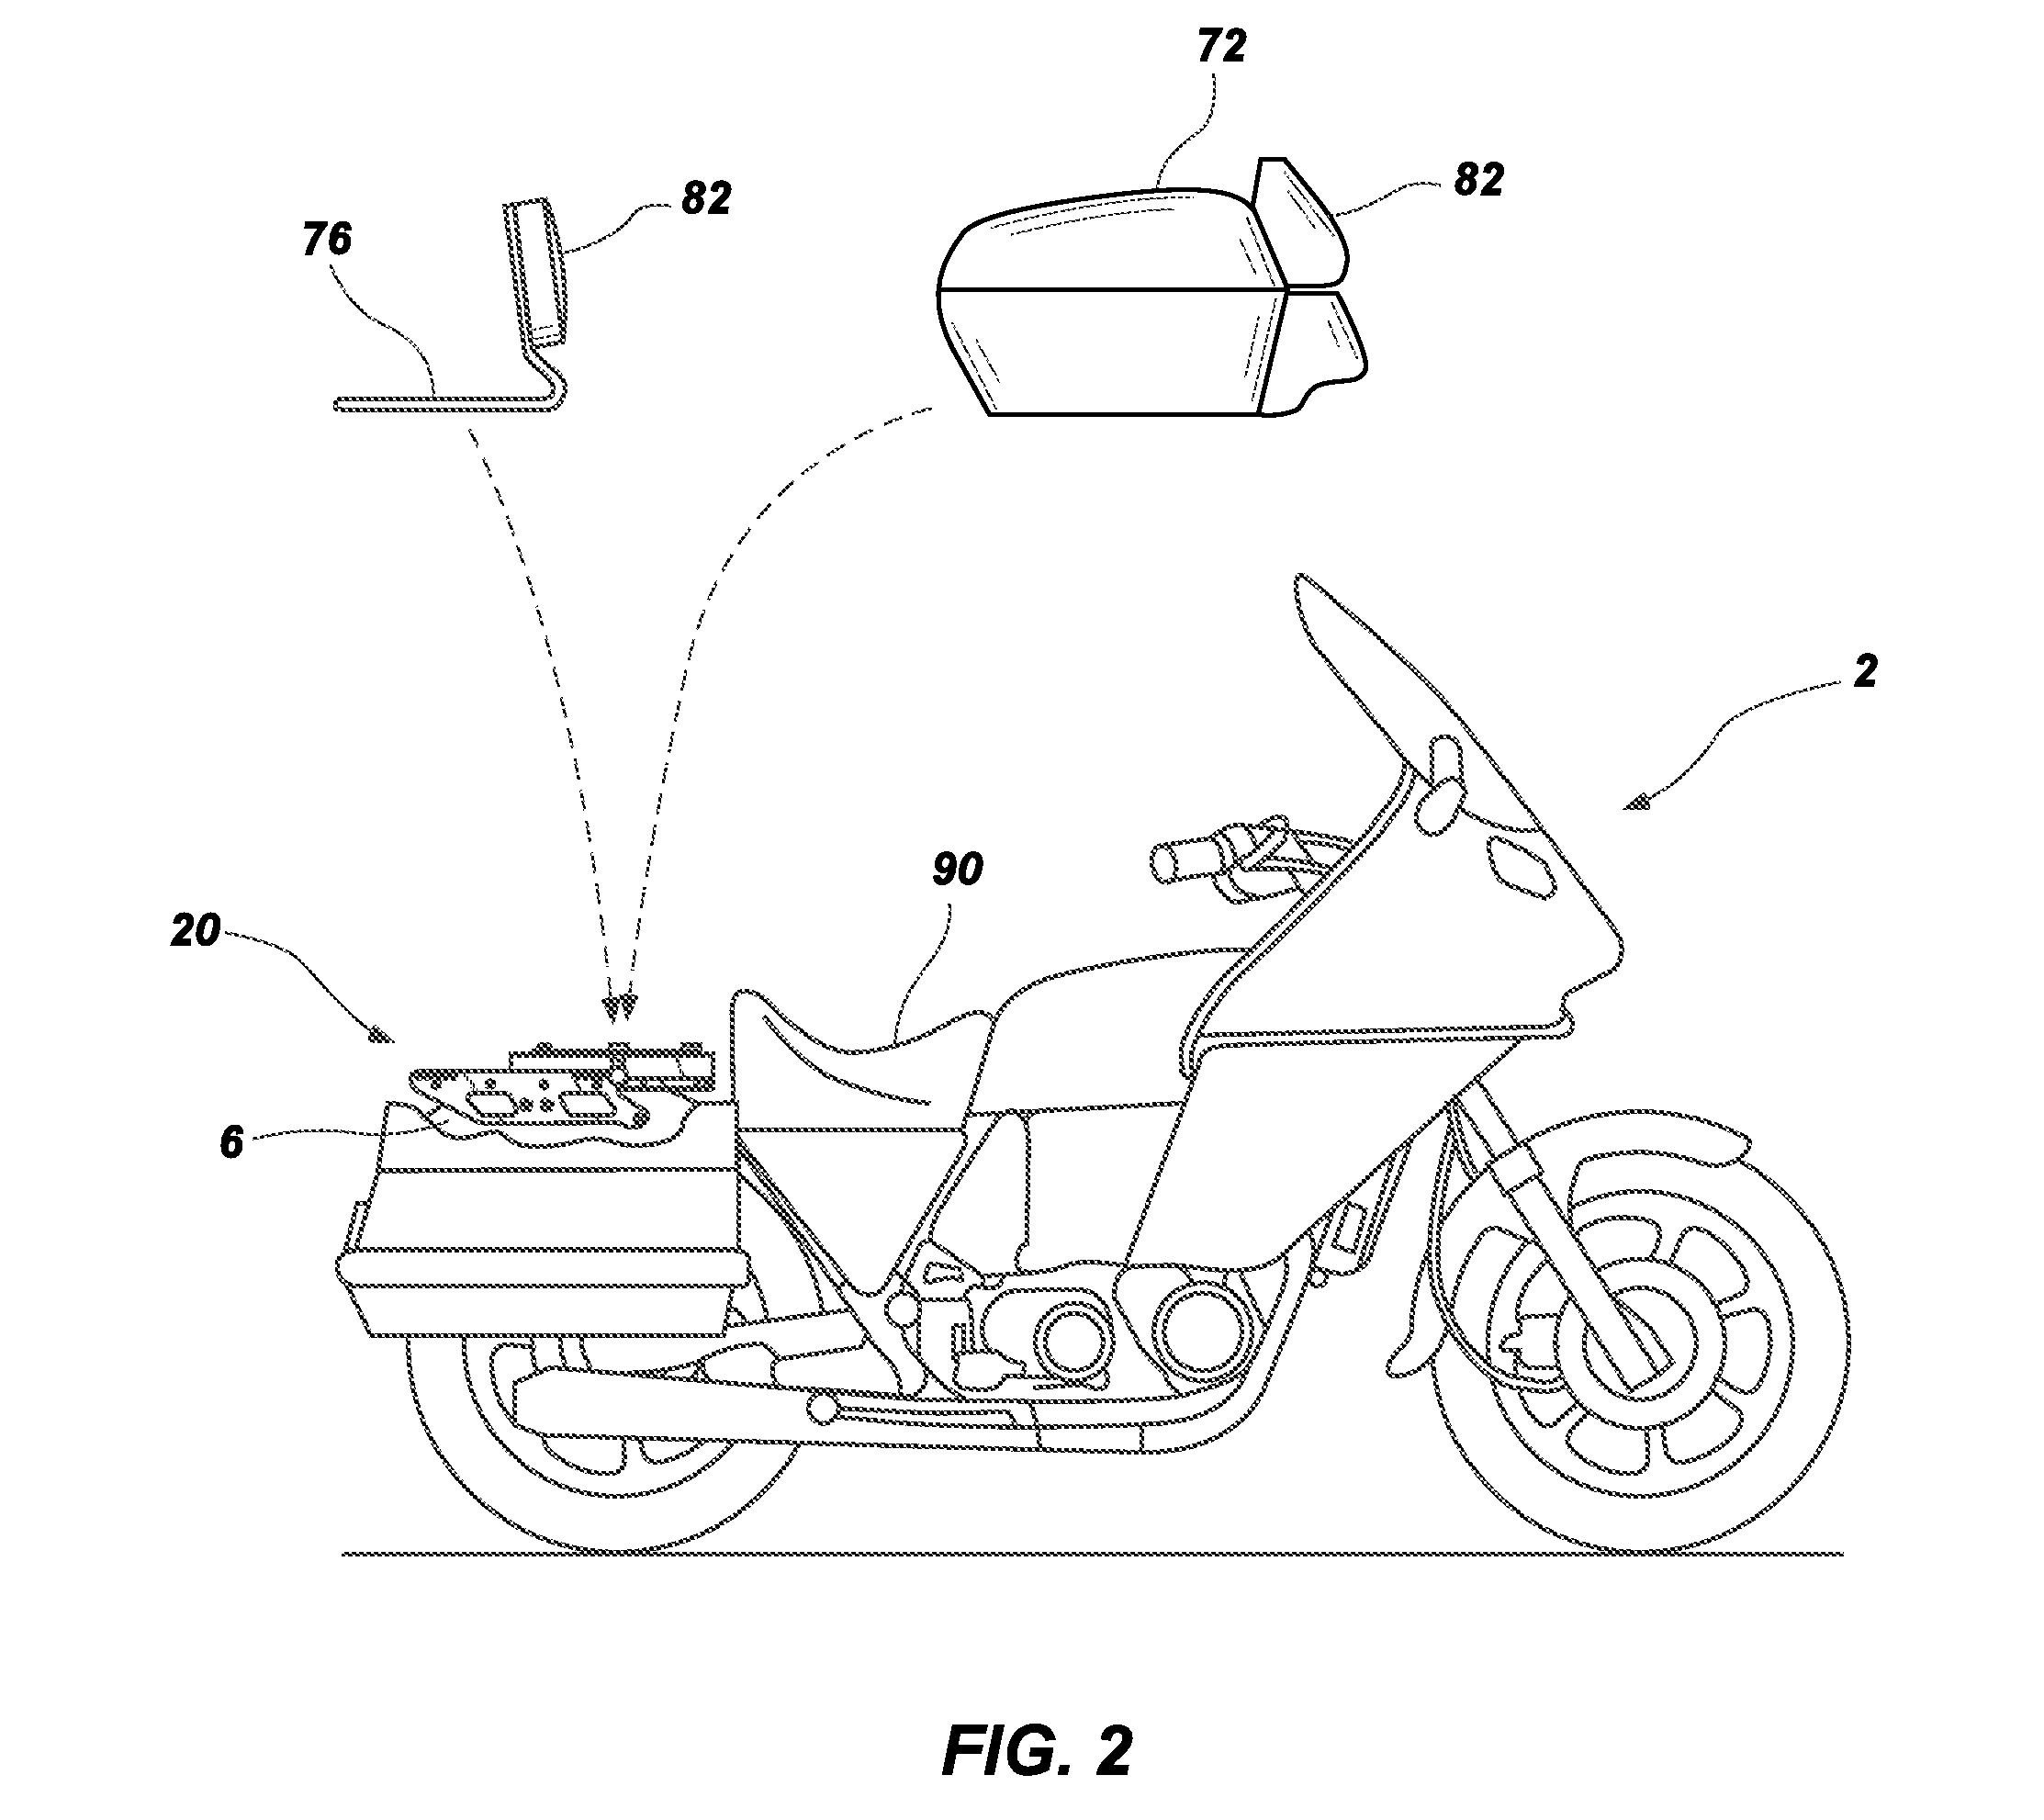 Displaceable utility positioning system for motorcycles